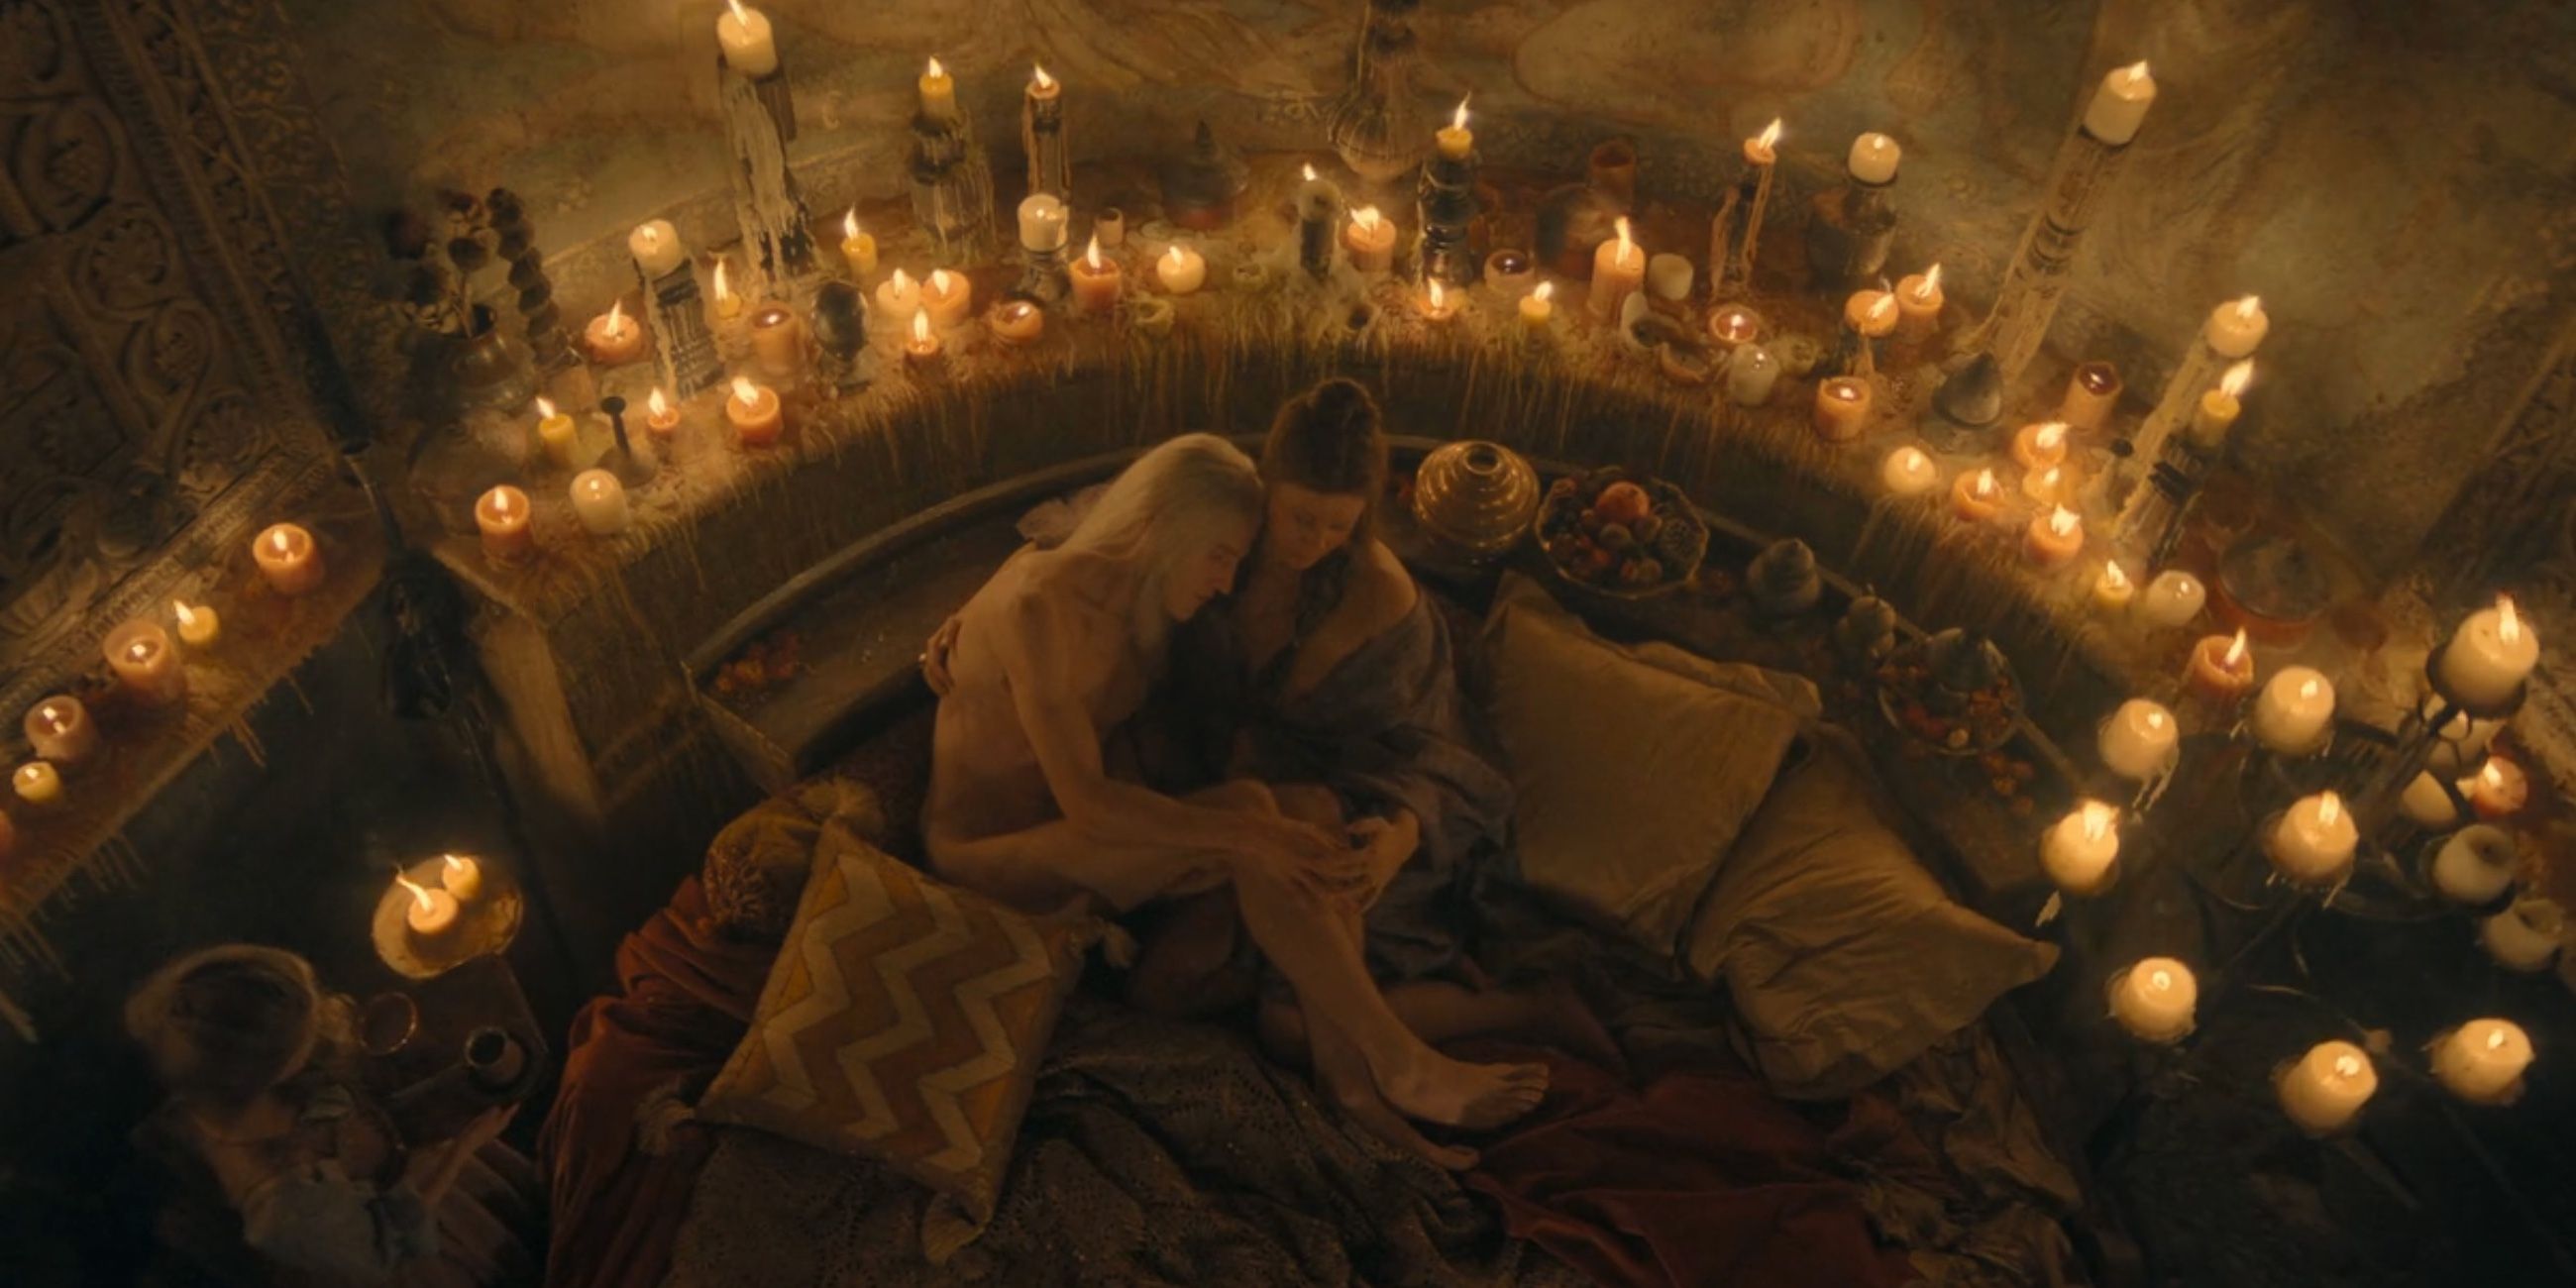 Aemond curled up with Sylvia in bed in House of the Dragon season 2 episode 2